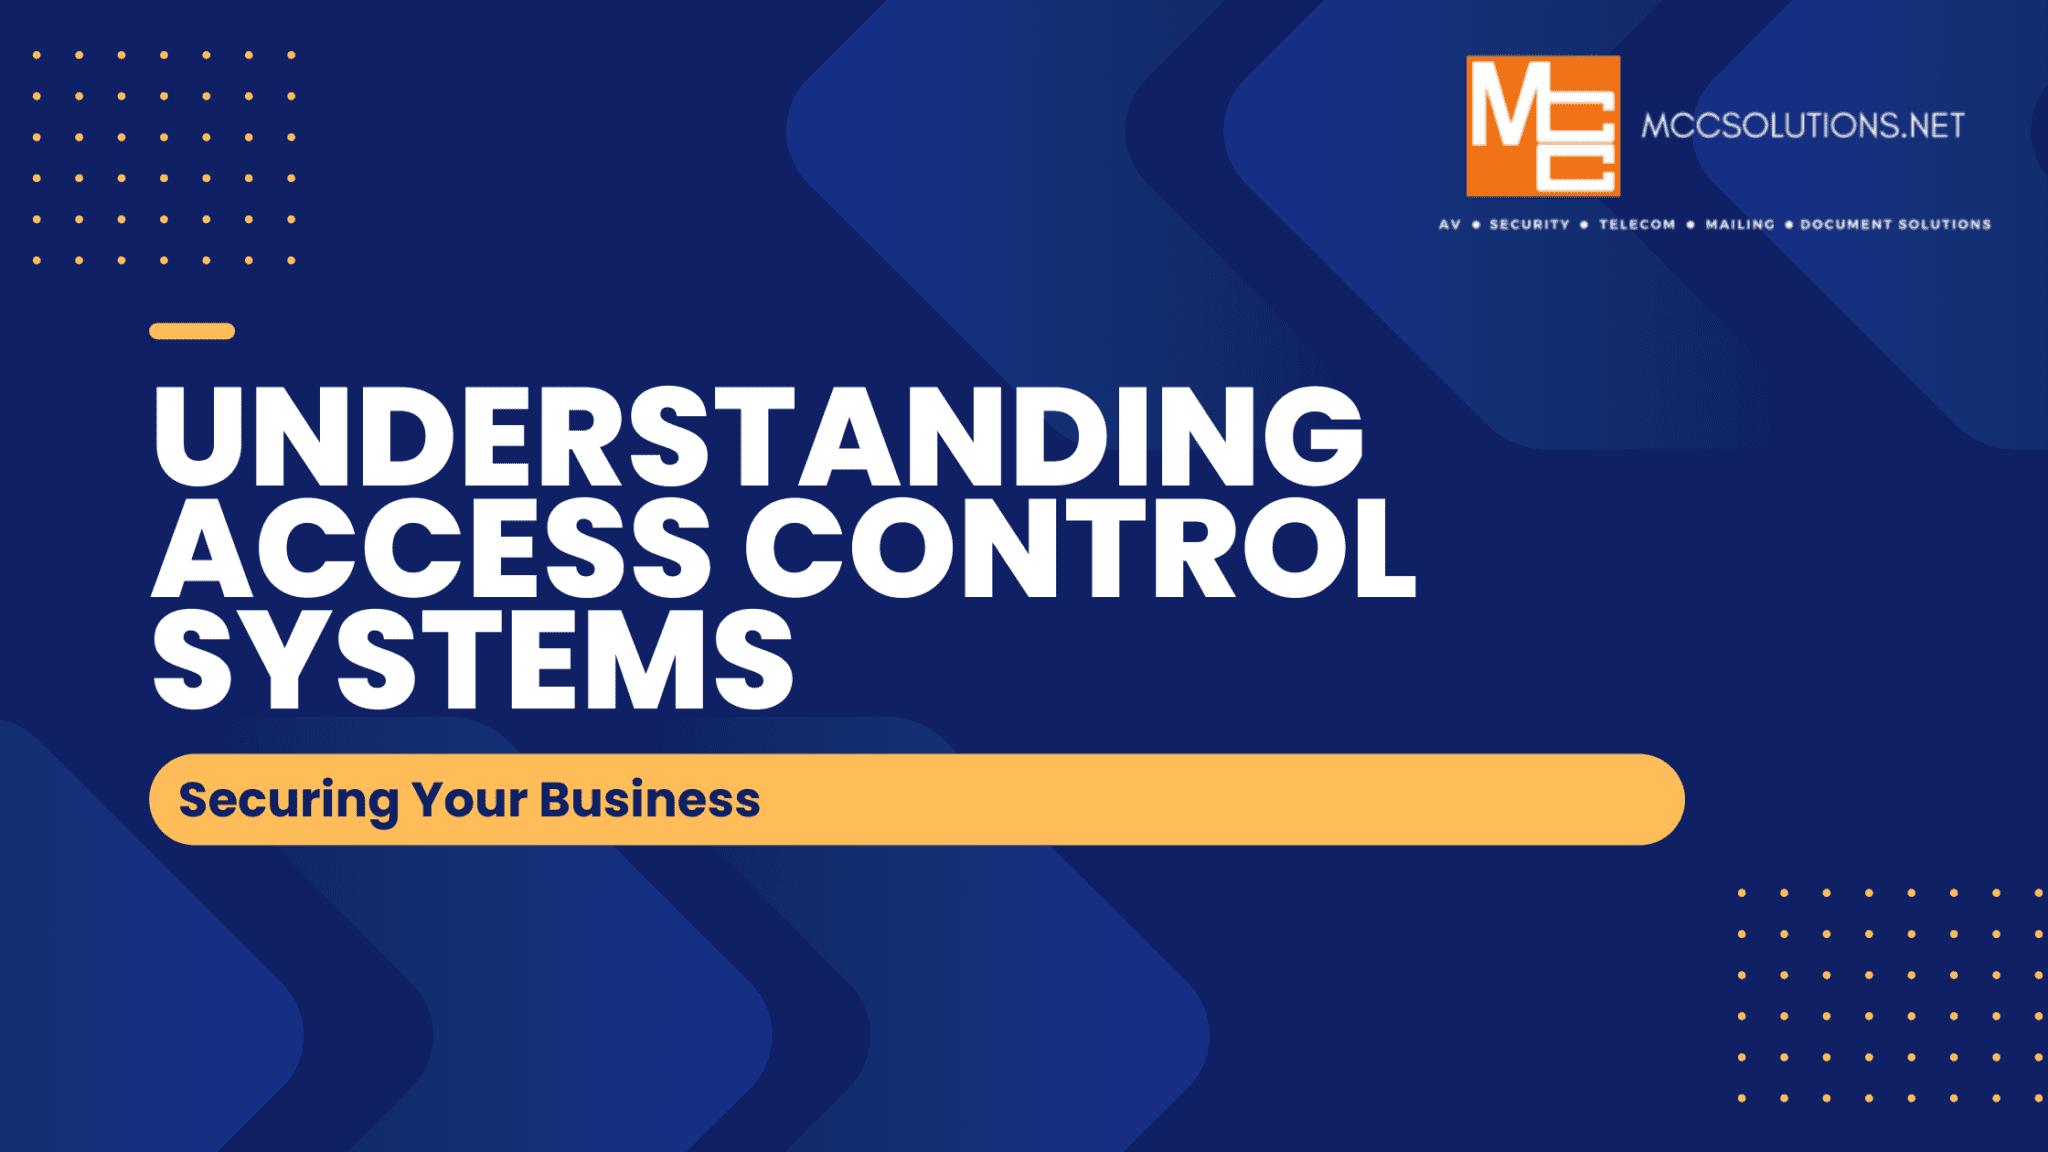 Understanding Access Control Systems: Securing Your Business